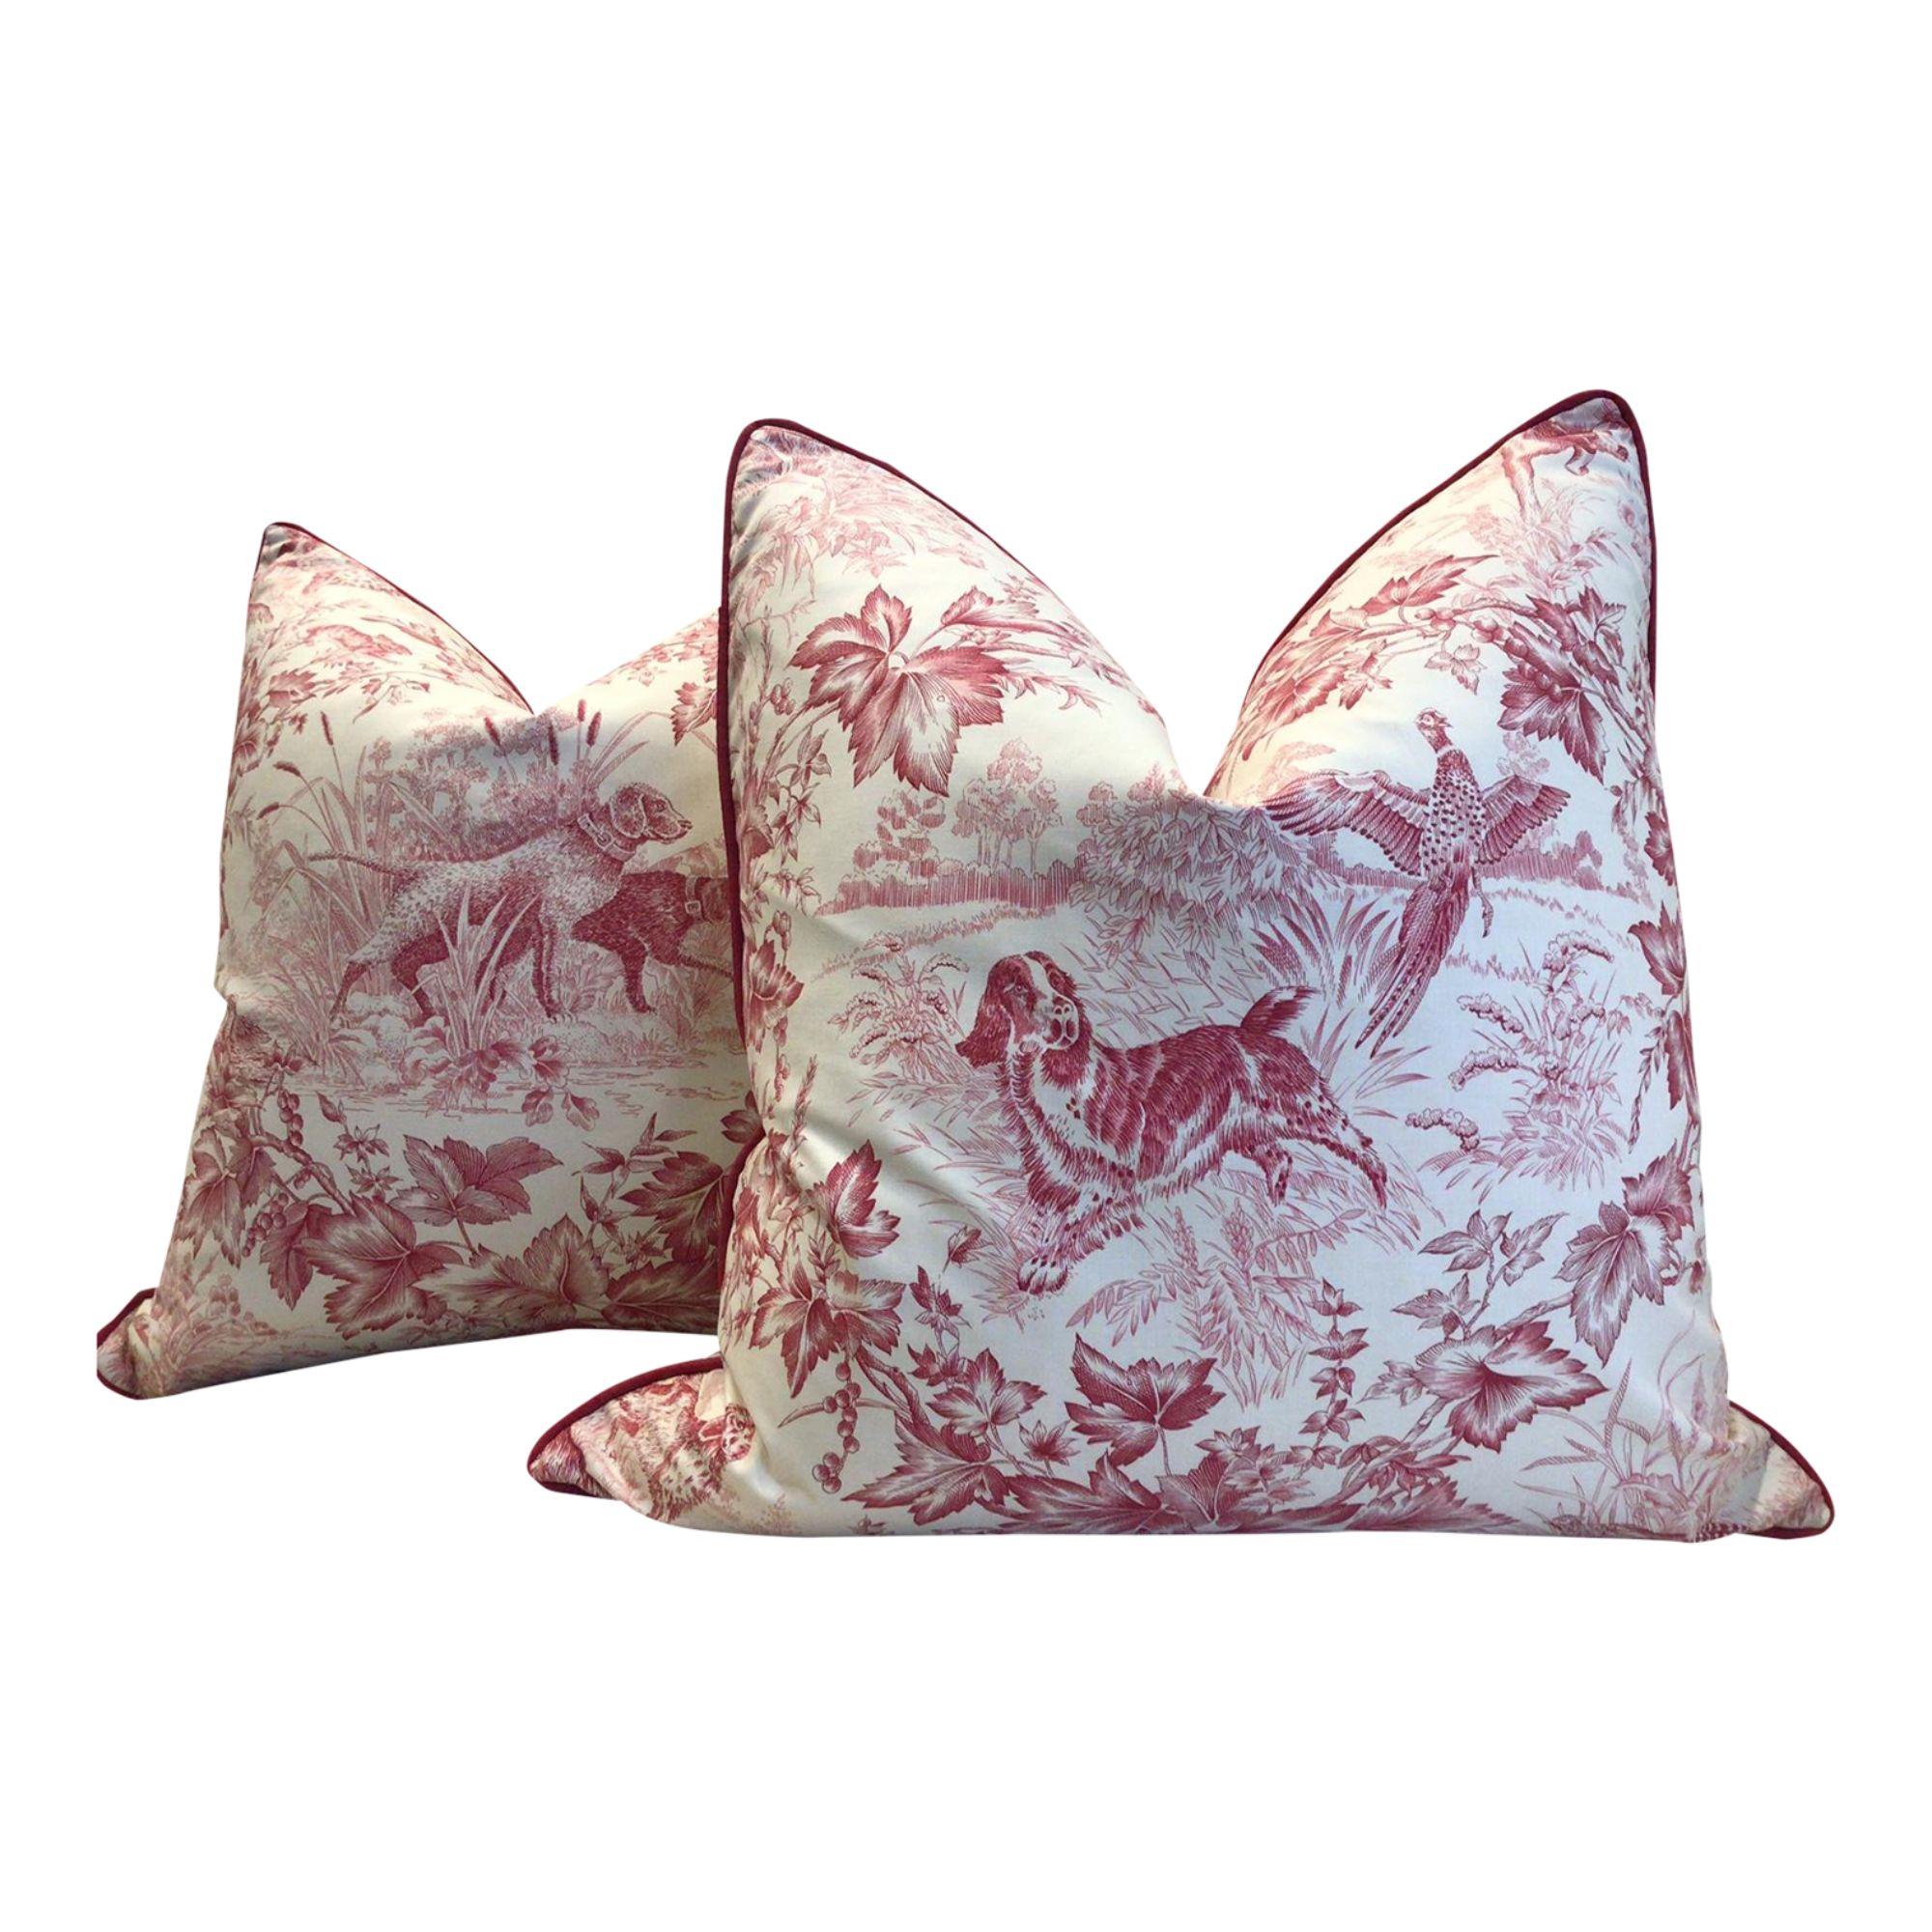 Pair of Brunschwig and Fils "On Point" Hunting Toile in Red & Cream Cord-Pillows For Sale